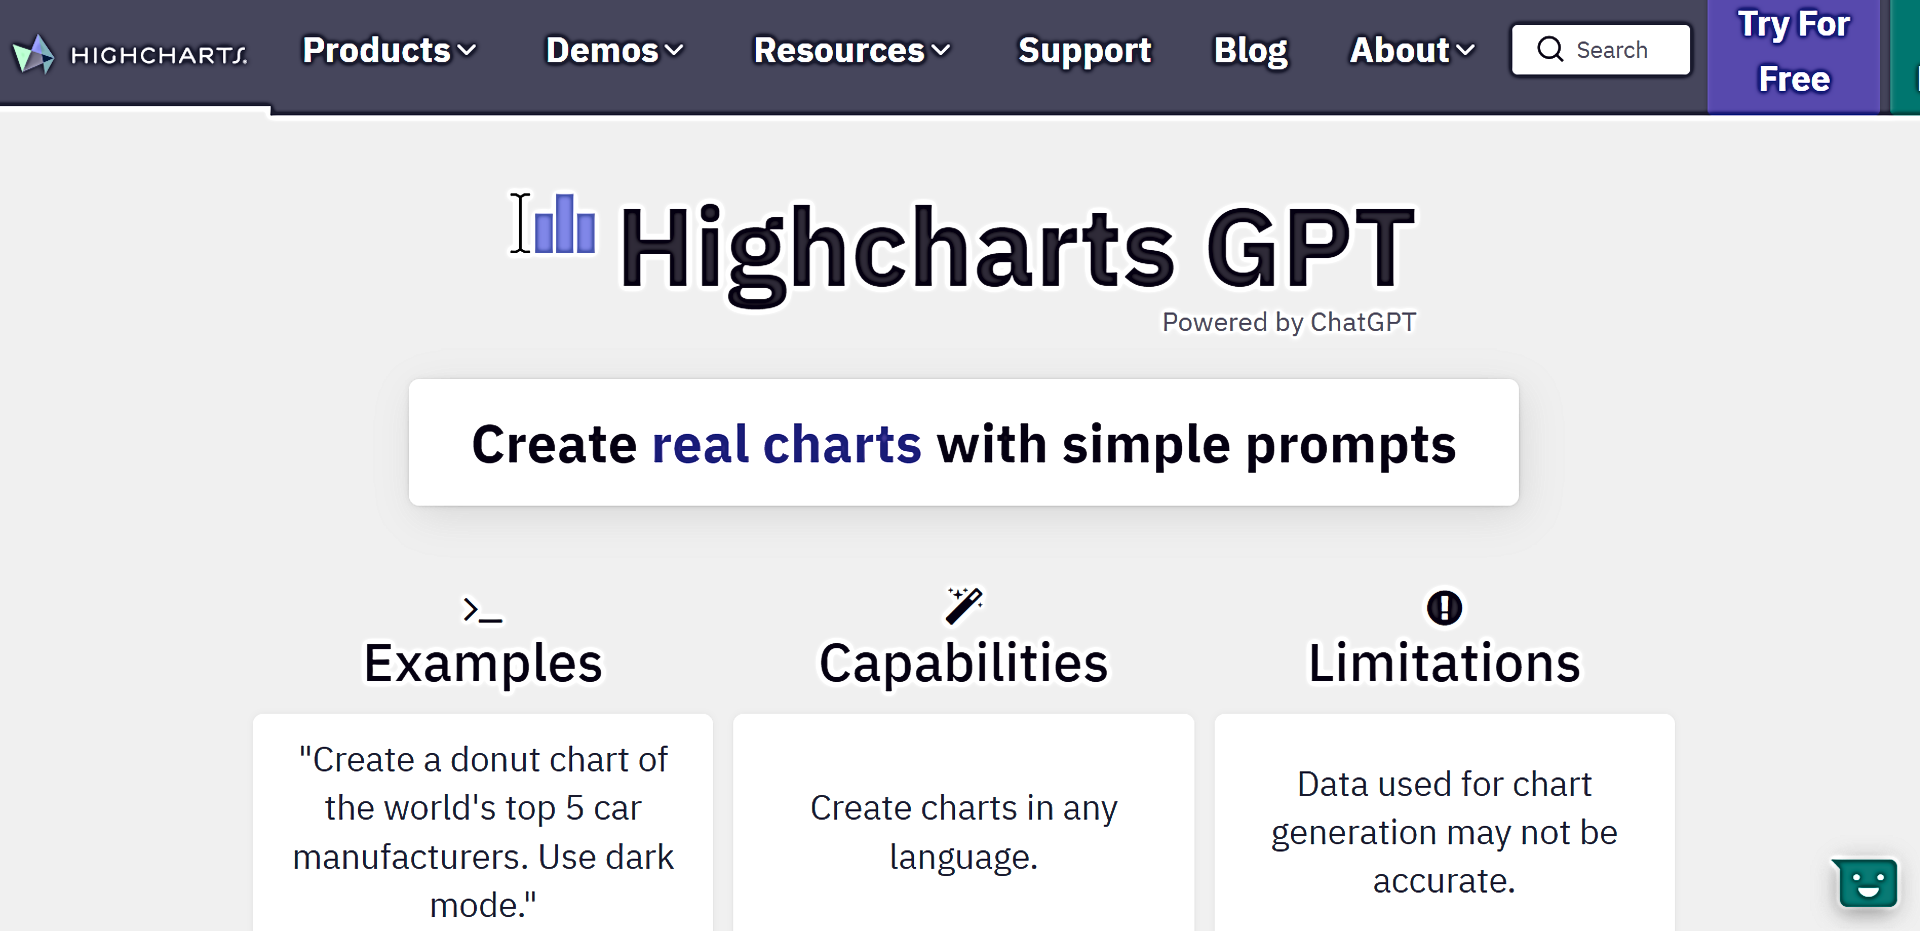 Highcharts featured